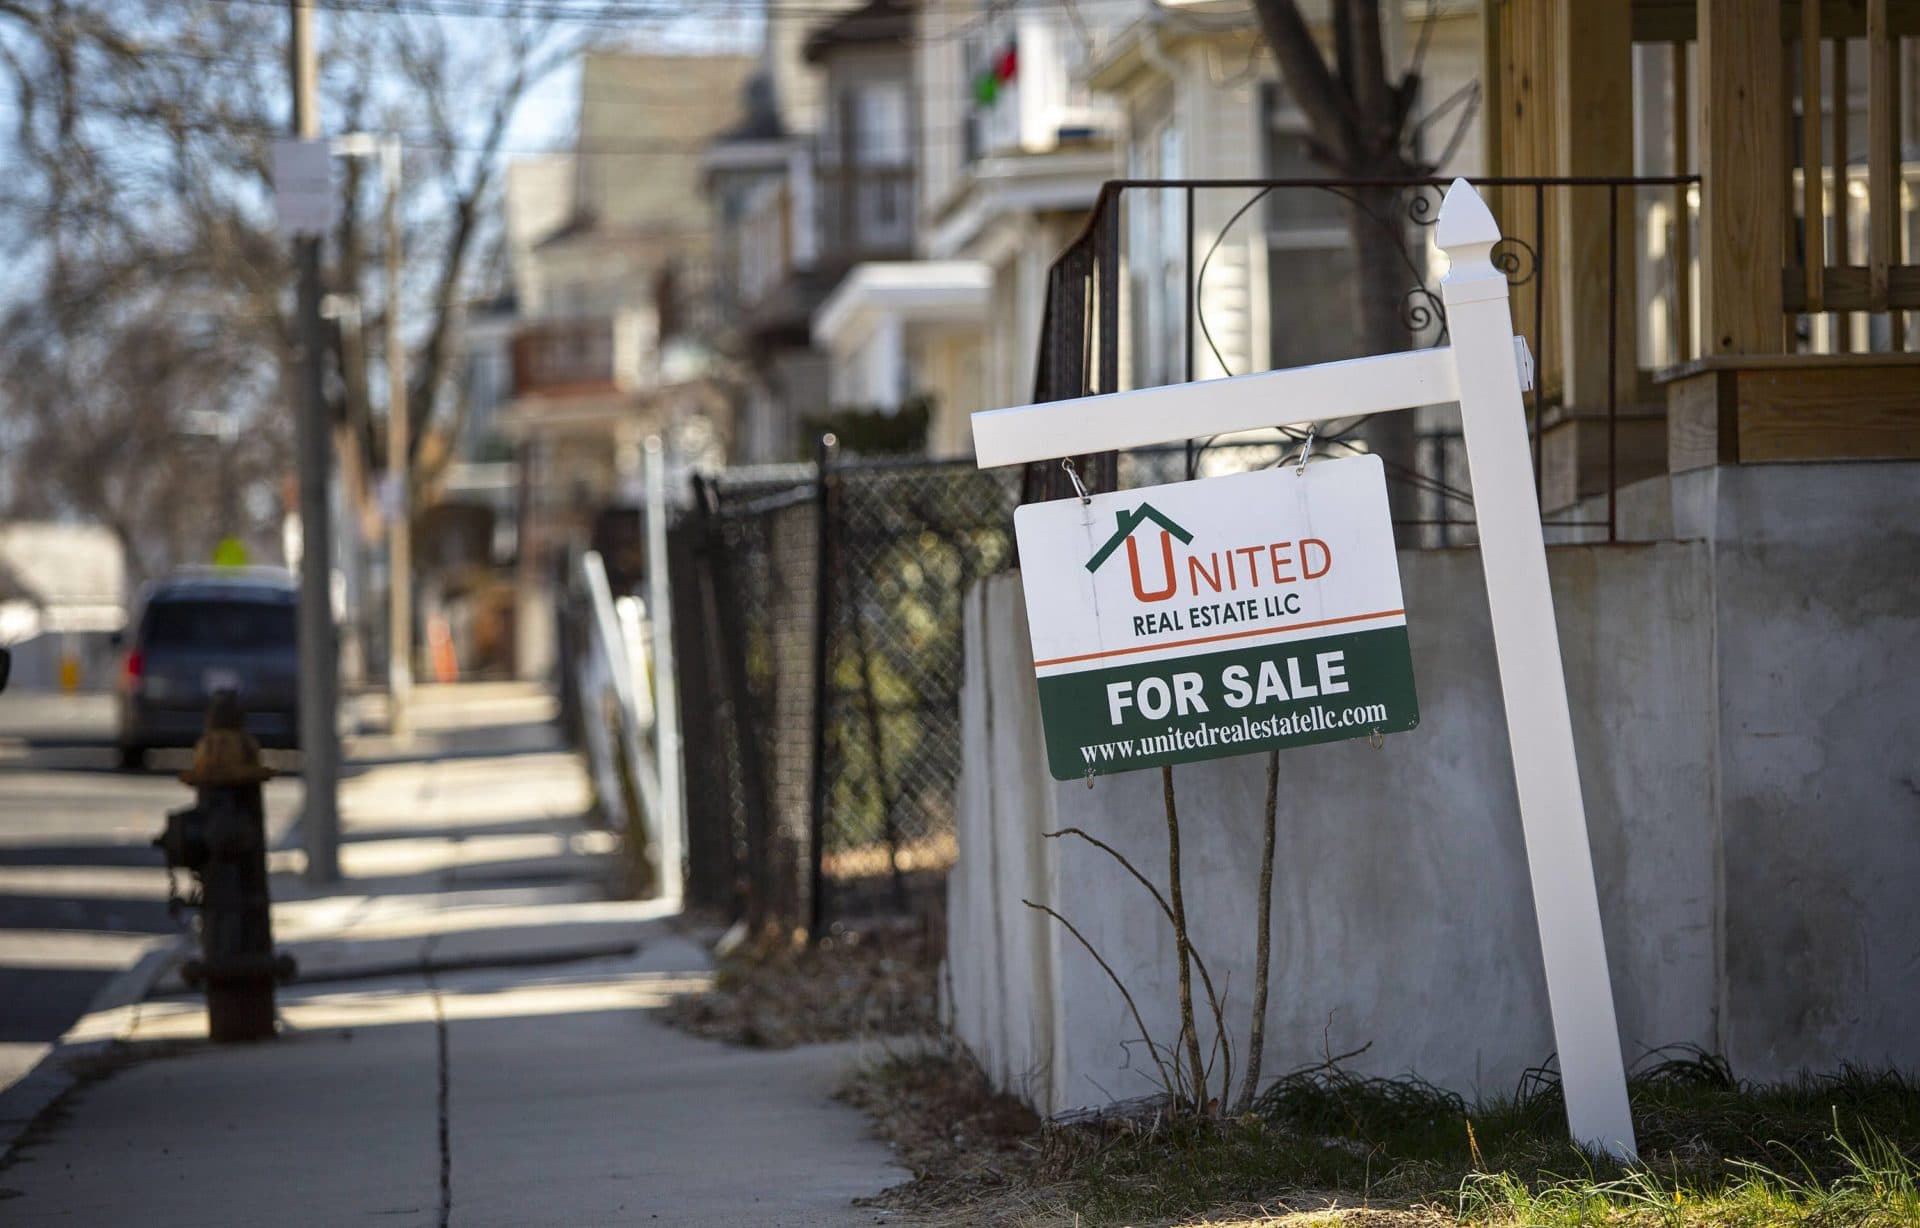 A "for sale" sign for a house on Ballou Avenue in Mattapan. (Robin Lubbock/WBUR)